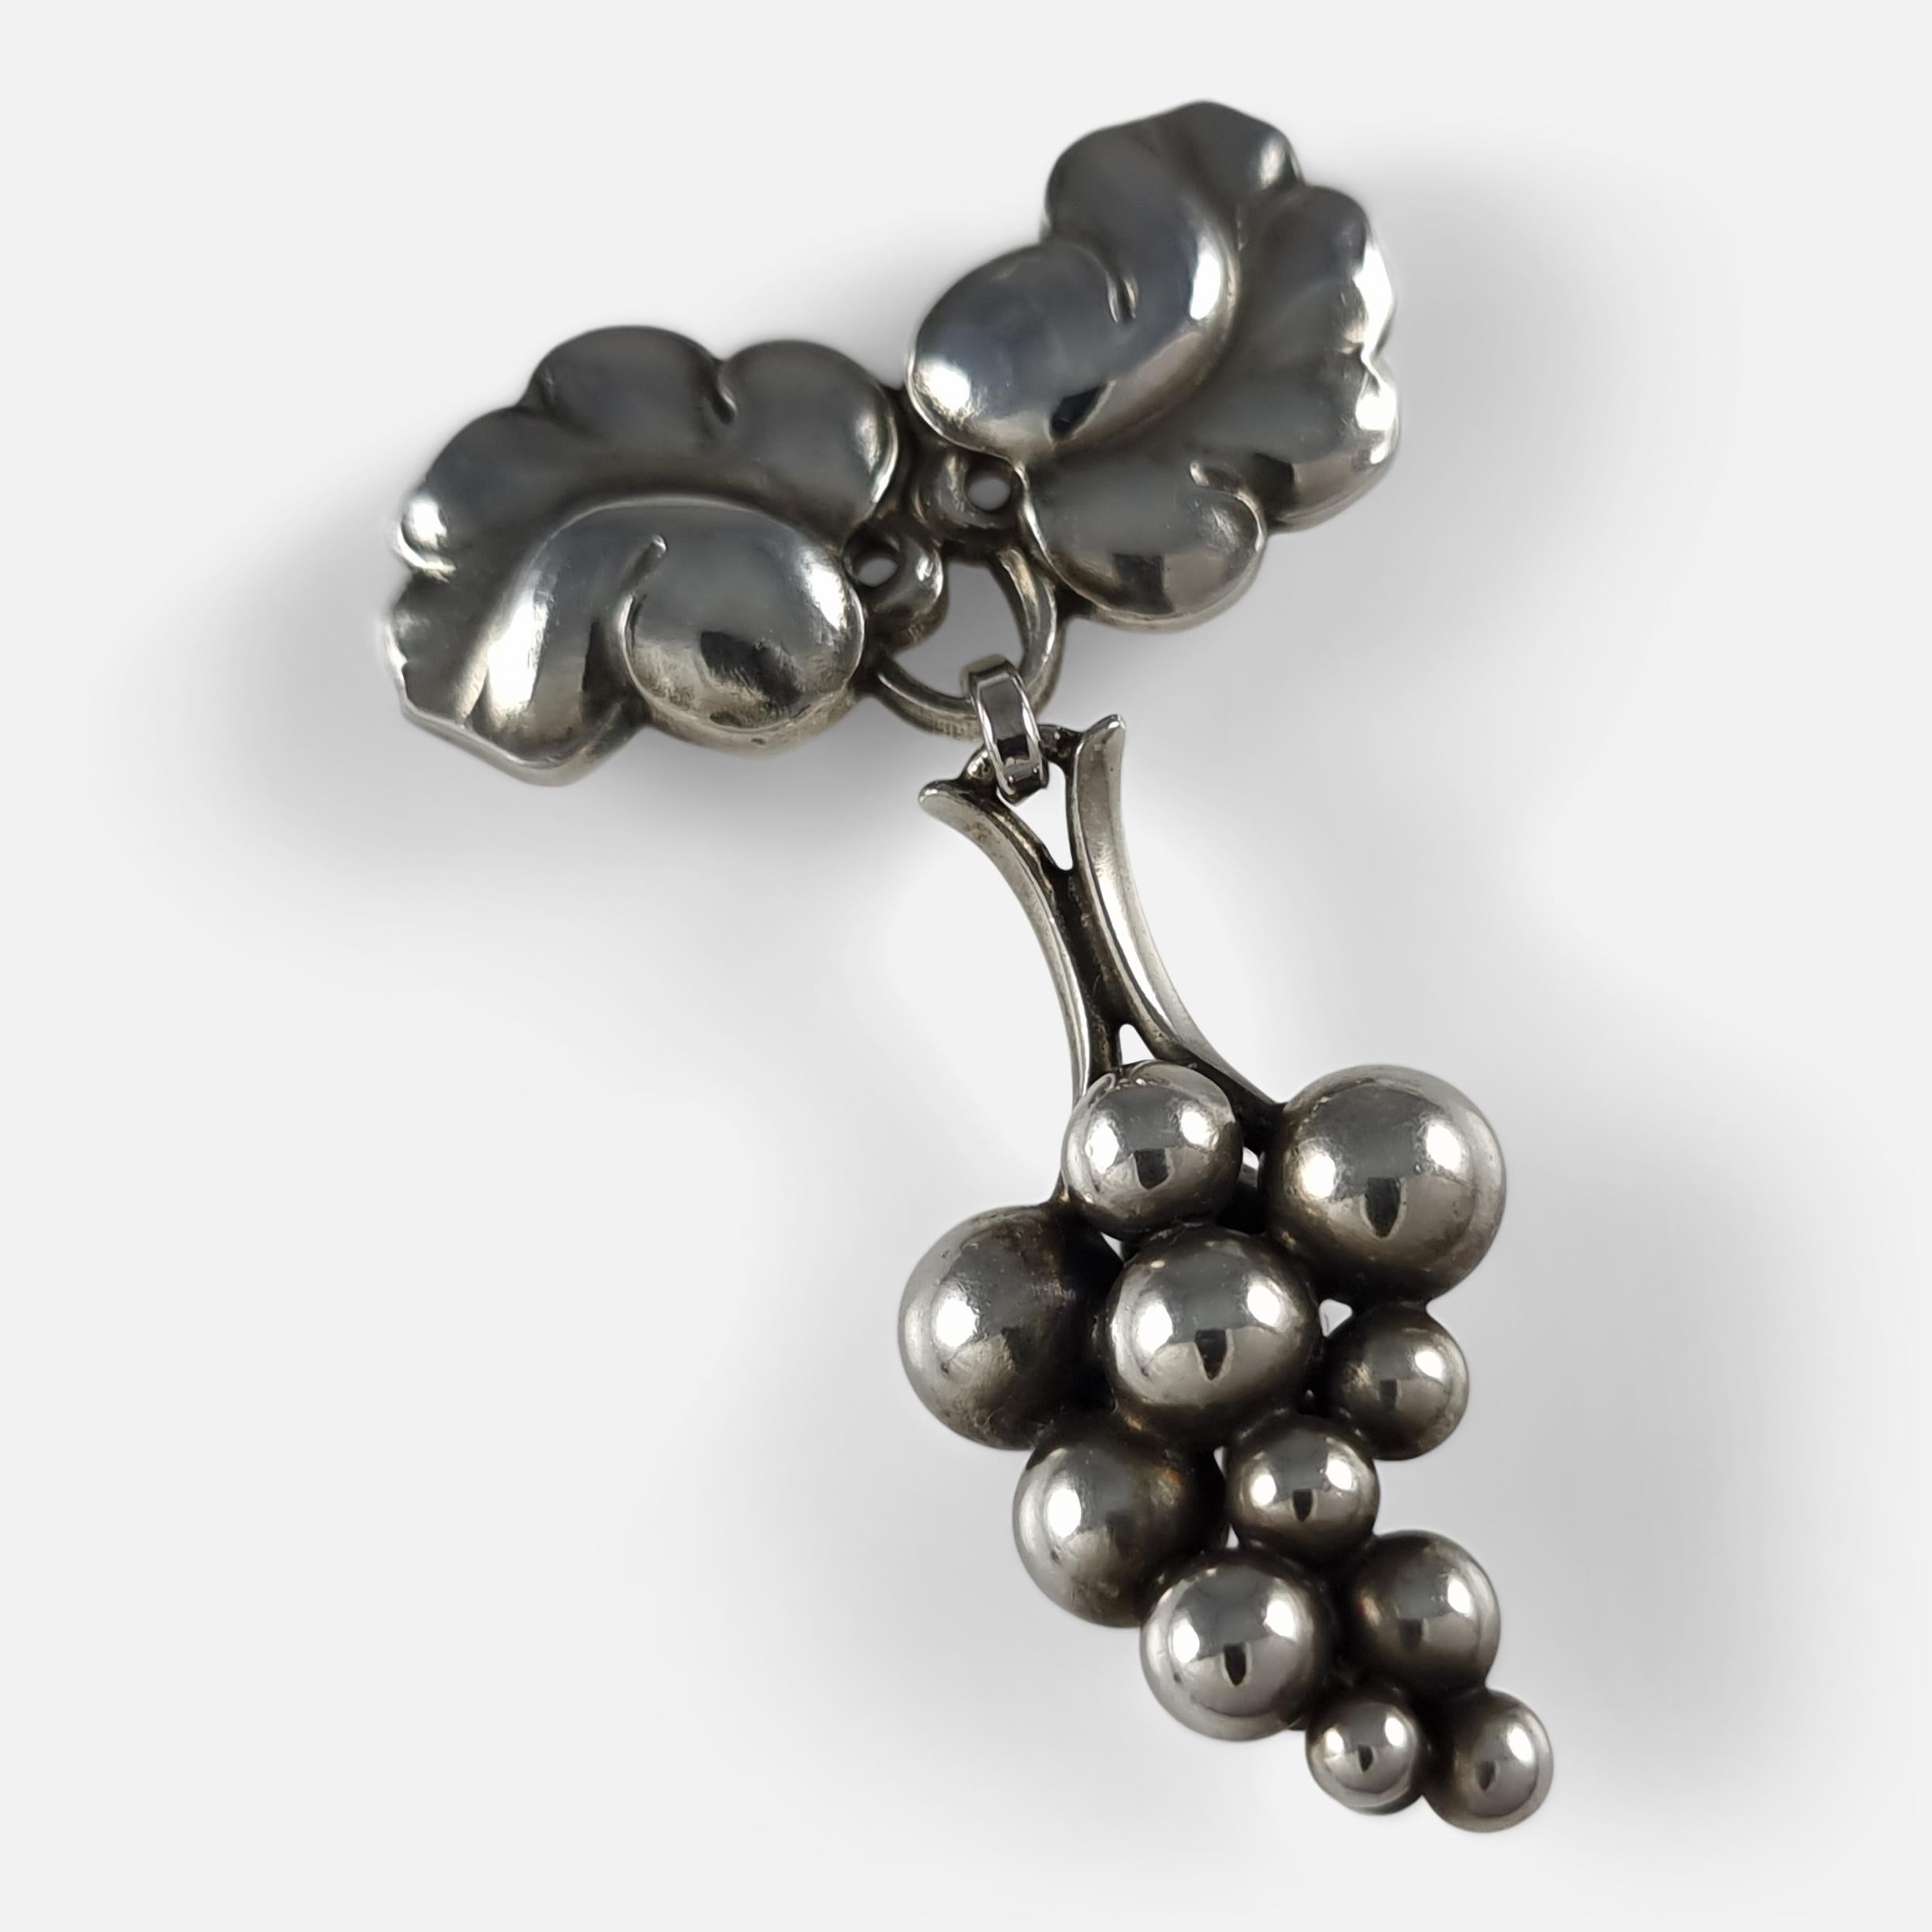 A Georg Jensen sterling silver moonlight grapes brooch, design #217 B. The brooch is designed by Harald Nielsen for Georg Jensen.

Stamped Georg Jensen within dotted oval mark, '925S', and 'Denmark'.

The brooch is UK hallmarked, stamped '925' to